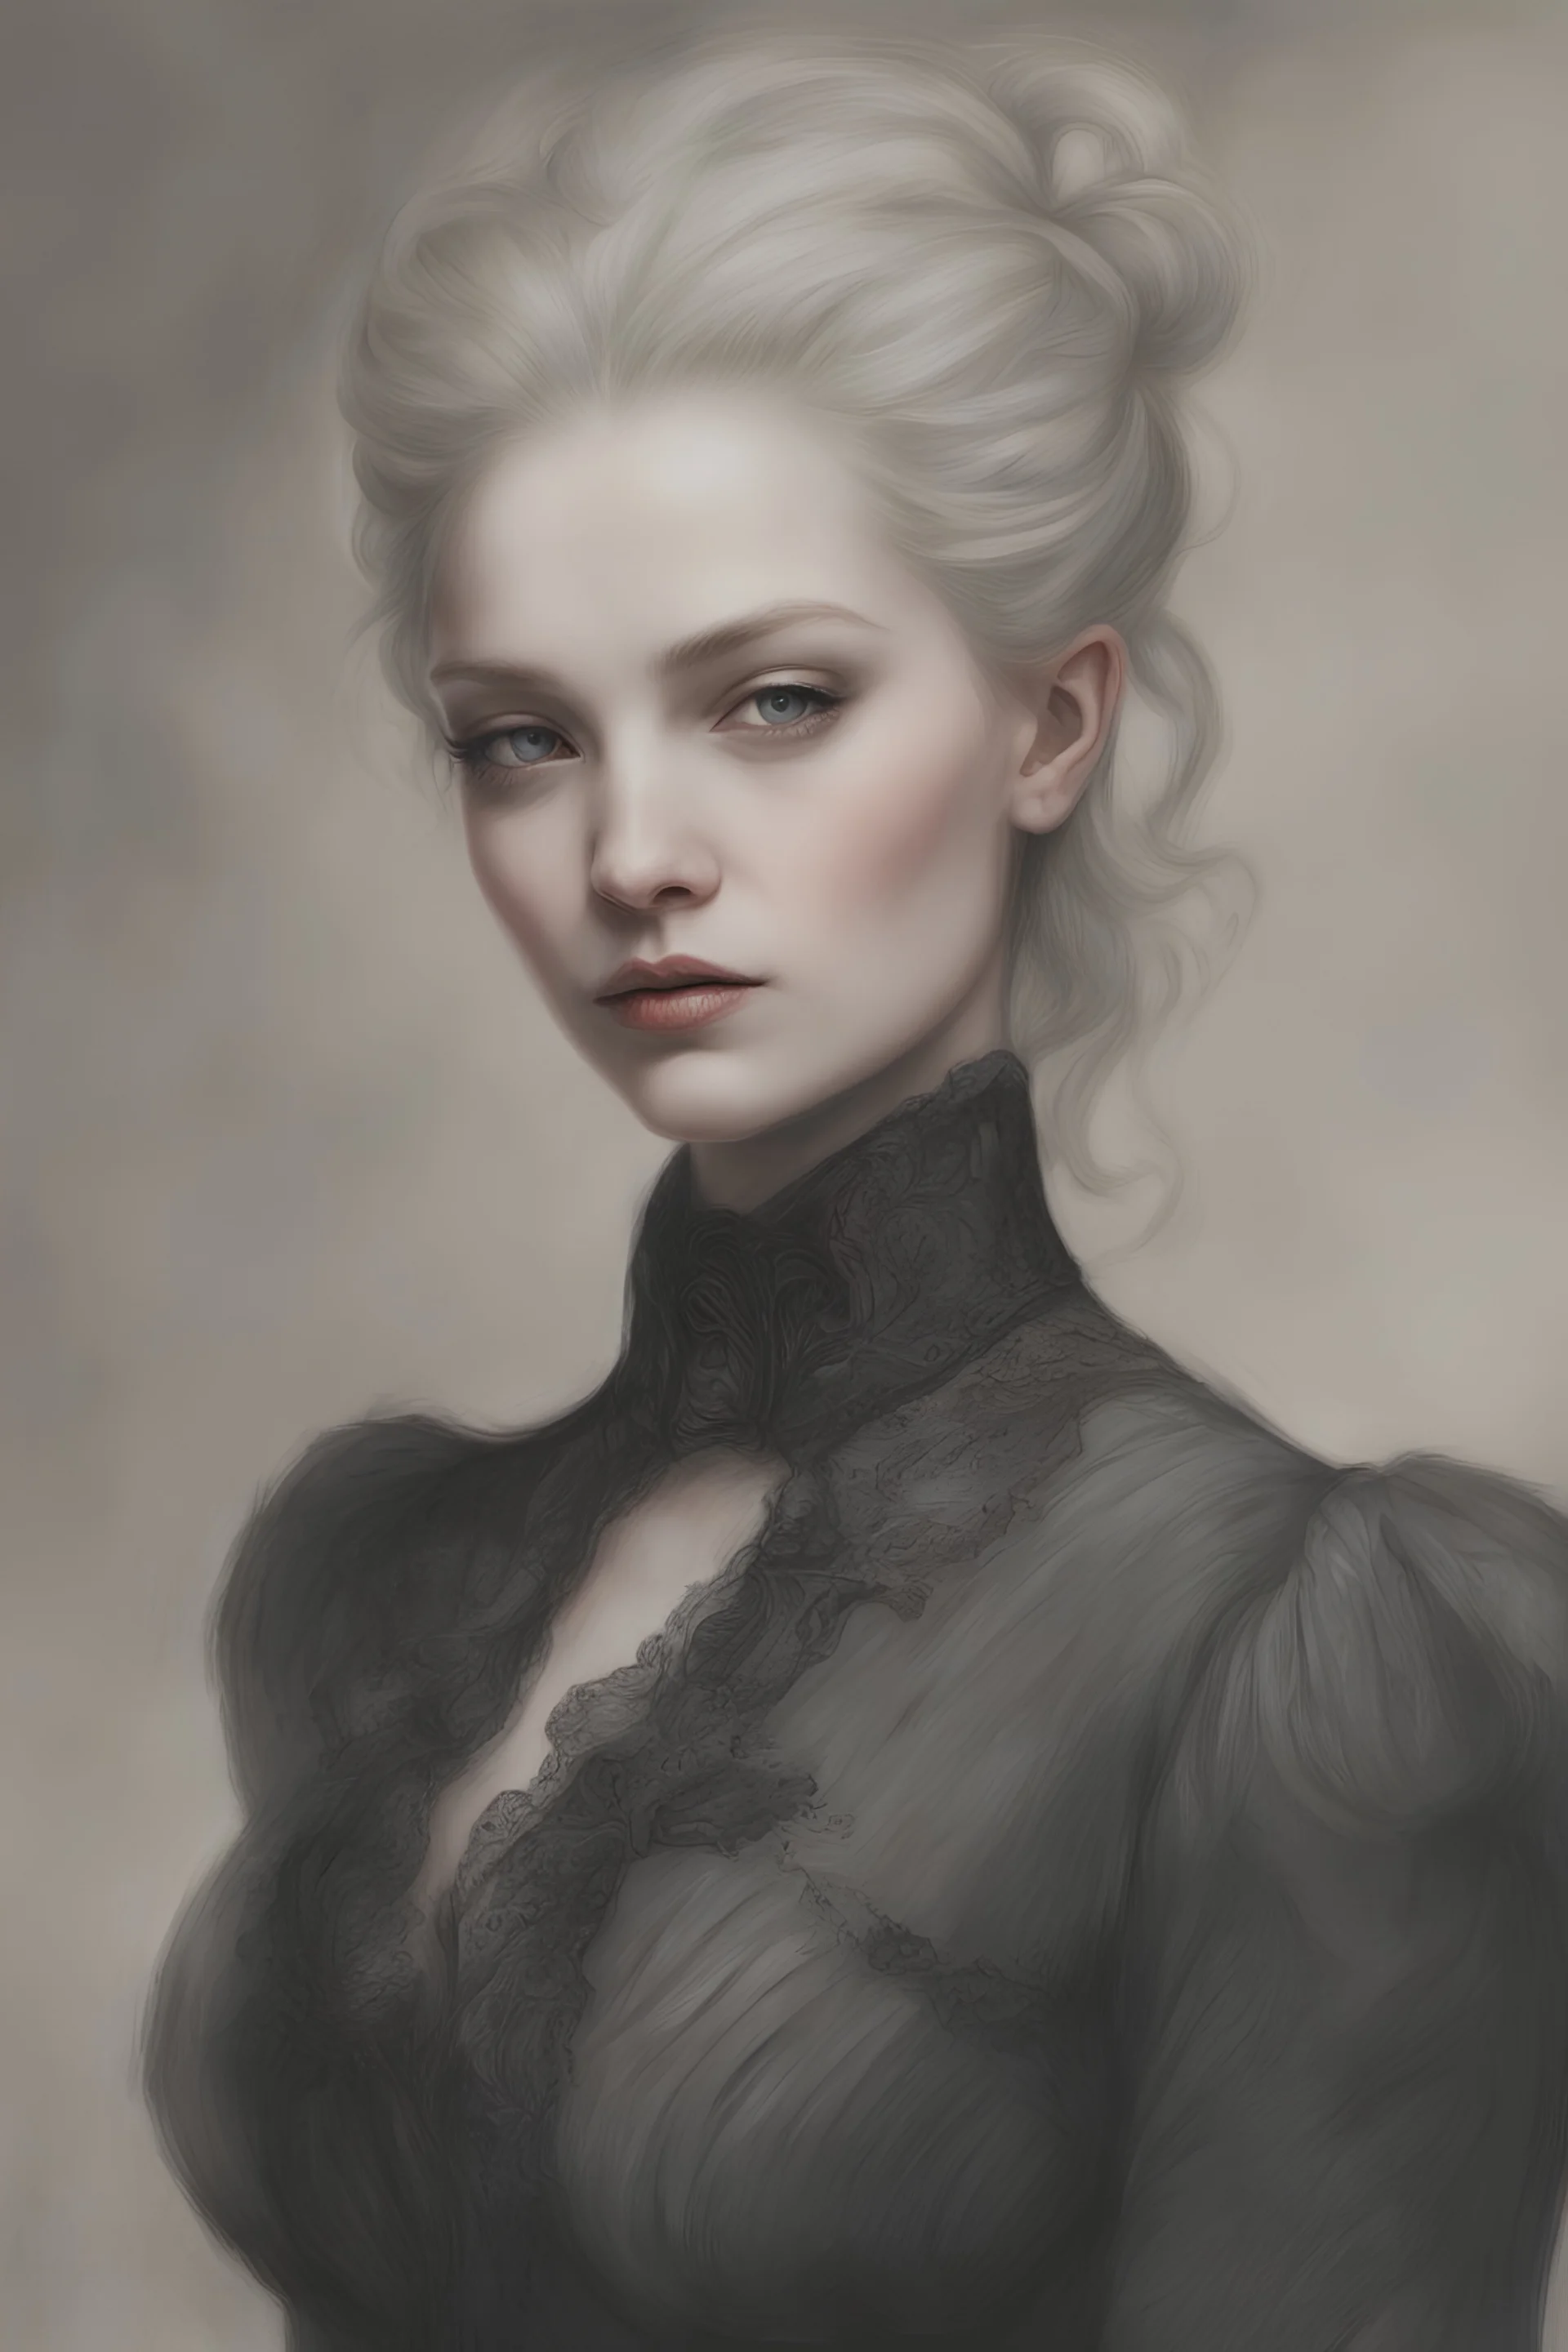 Alexandra "Sasha" Aleksejevna Luss by Sigmund Freud's understanding was that a symbol Paris in the 18th century oil paiting by artgerm Tim Burton style In Freudian depth psychology, the symbol is thought to consist of partially unconscious matter. from unconscious to conscious dream, symptom, image